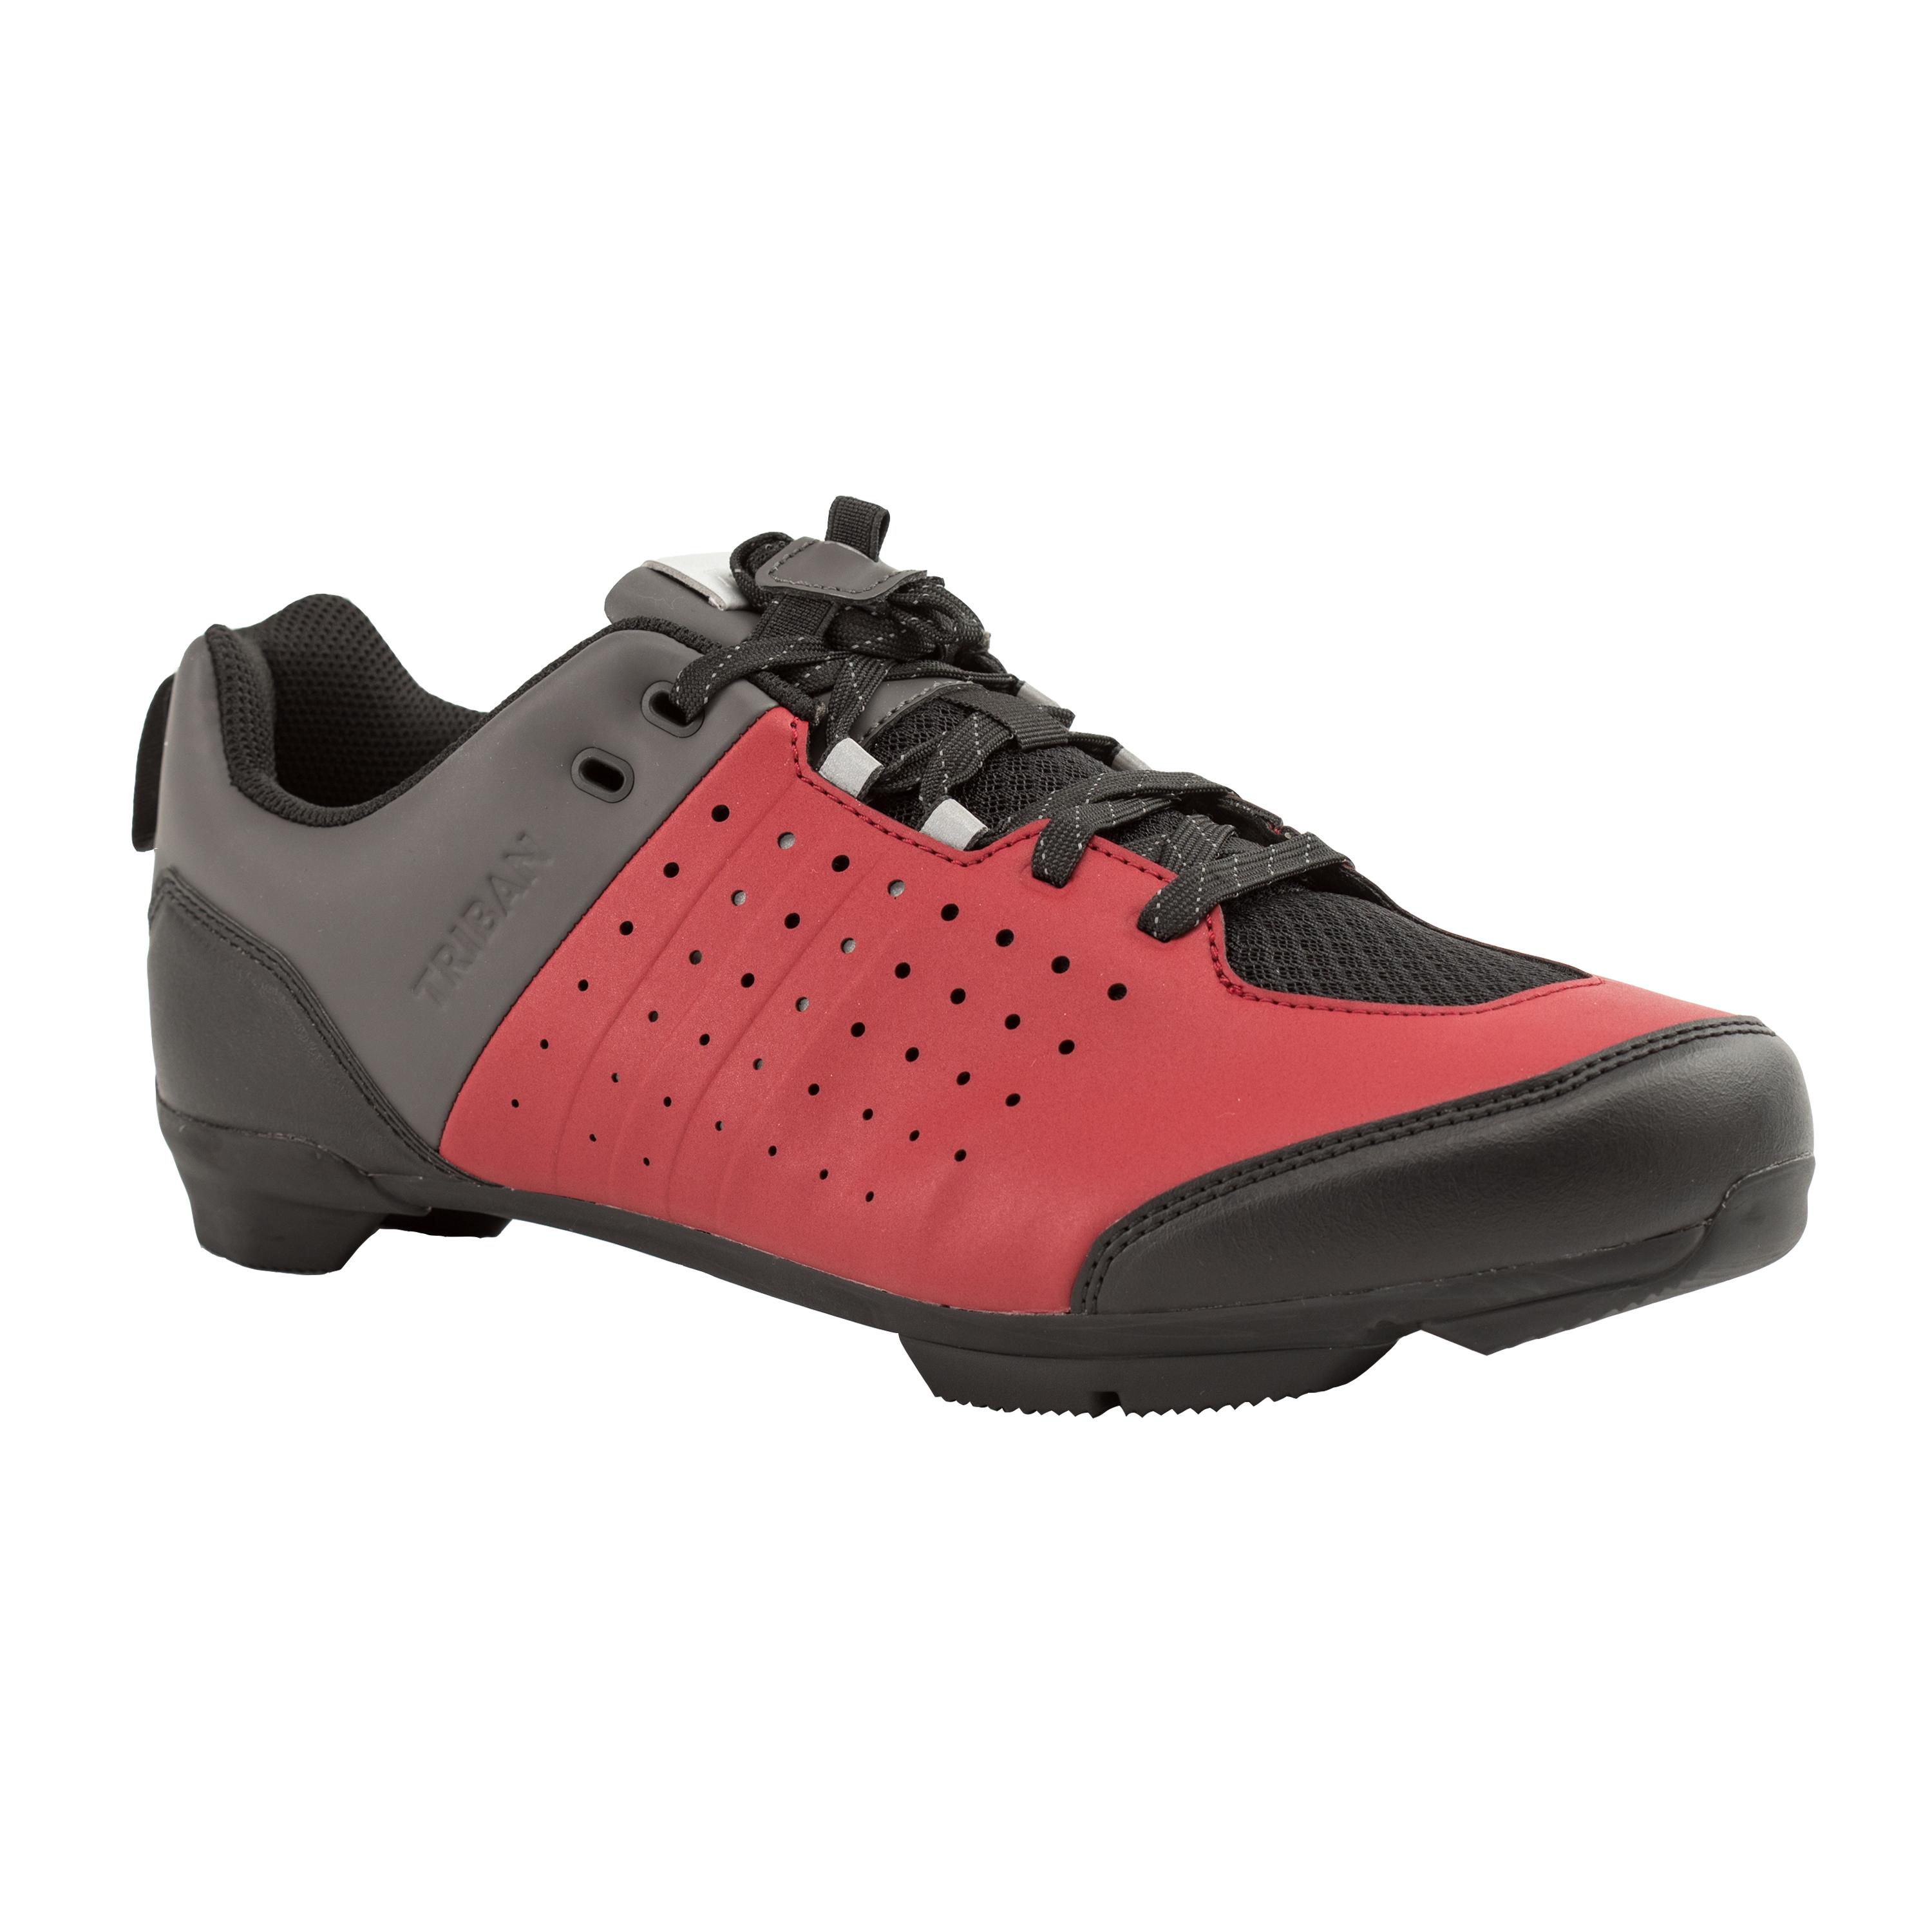 Road and Gravel Cycling Lace-Up SPD Shoes GRVL 500 - Burgundy / Grey 1/7